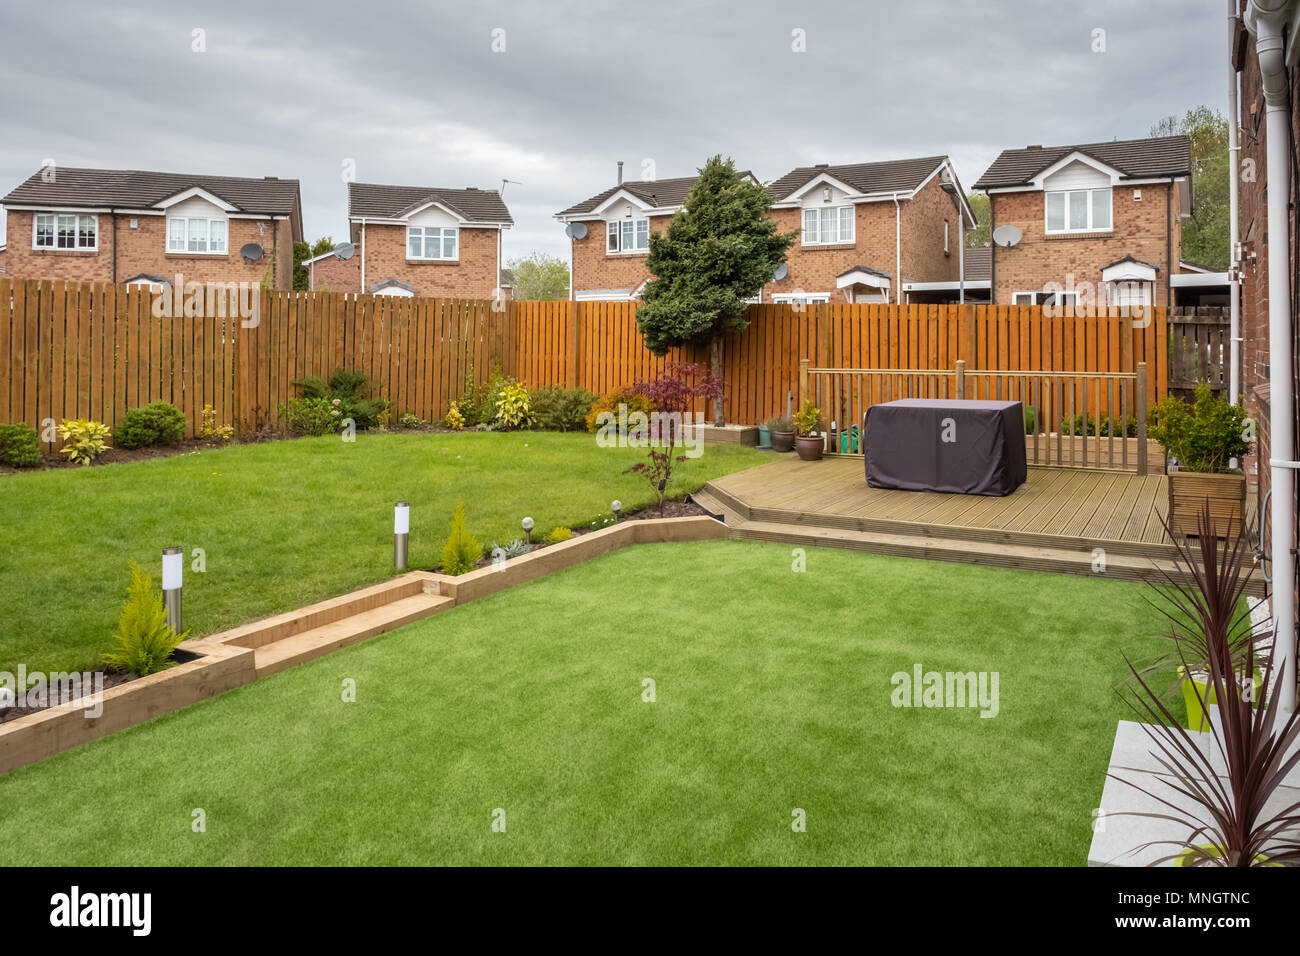 A modern garden with  a new planted lawn decking shrubs  and borders. Designed and owned by contributor. A good image for Landscape gardiners or desig Stock Photo